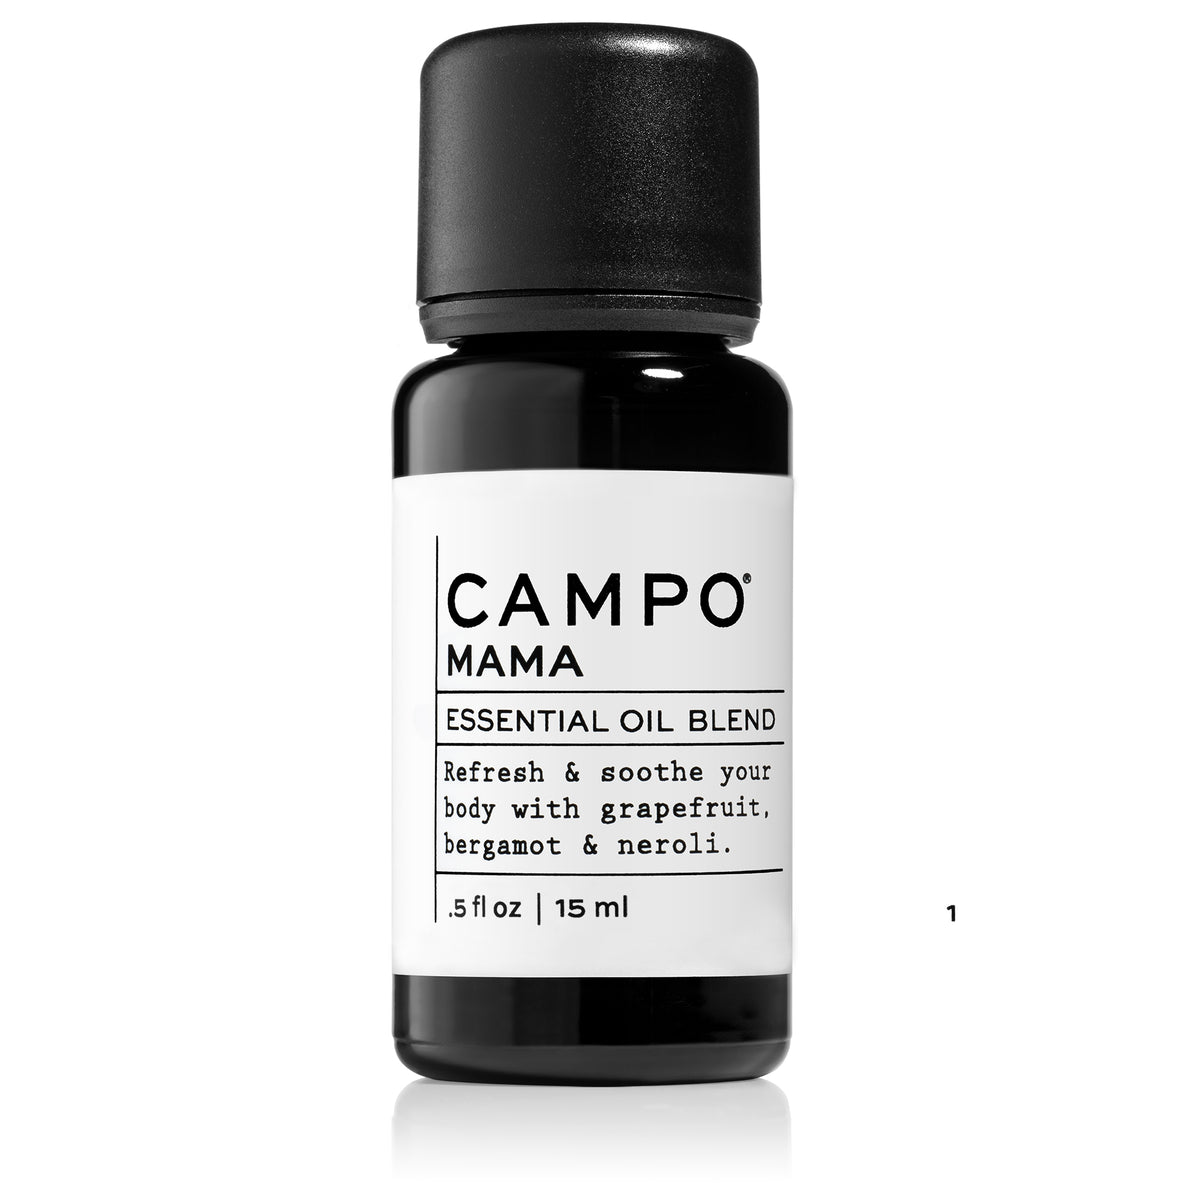 Campo Beauty MAMA Blend 15 ml Essential Oil. Pamper yourself, refresh &amp; uplift your mood with these 100% pure essential oils of grapefruit, bergamot &amp; neroli.